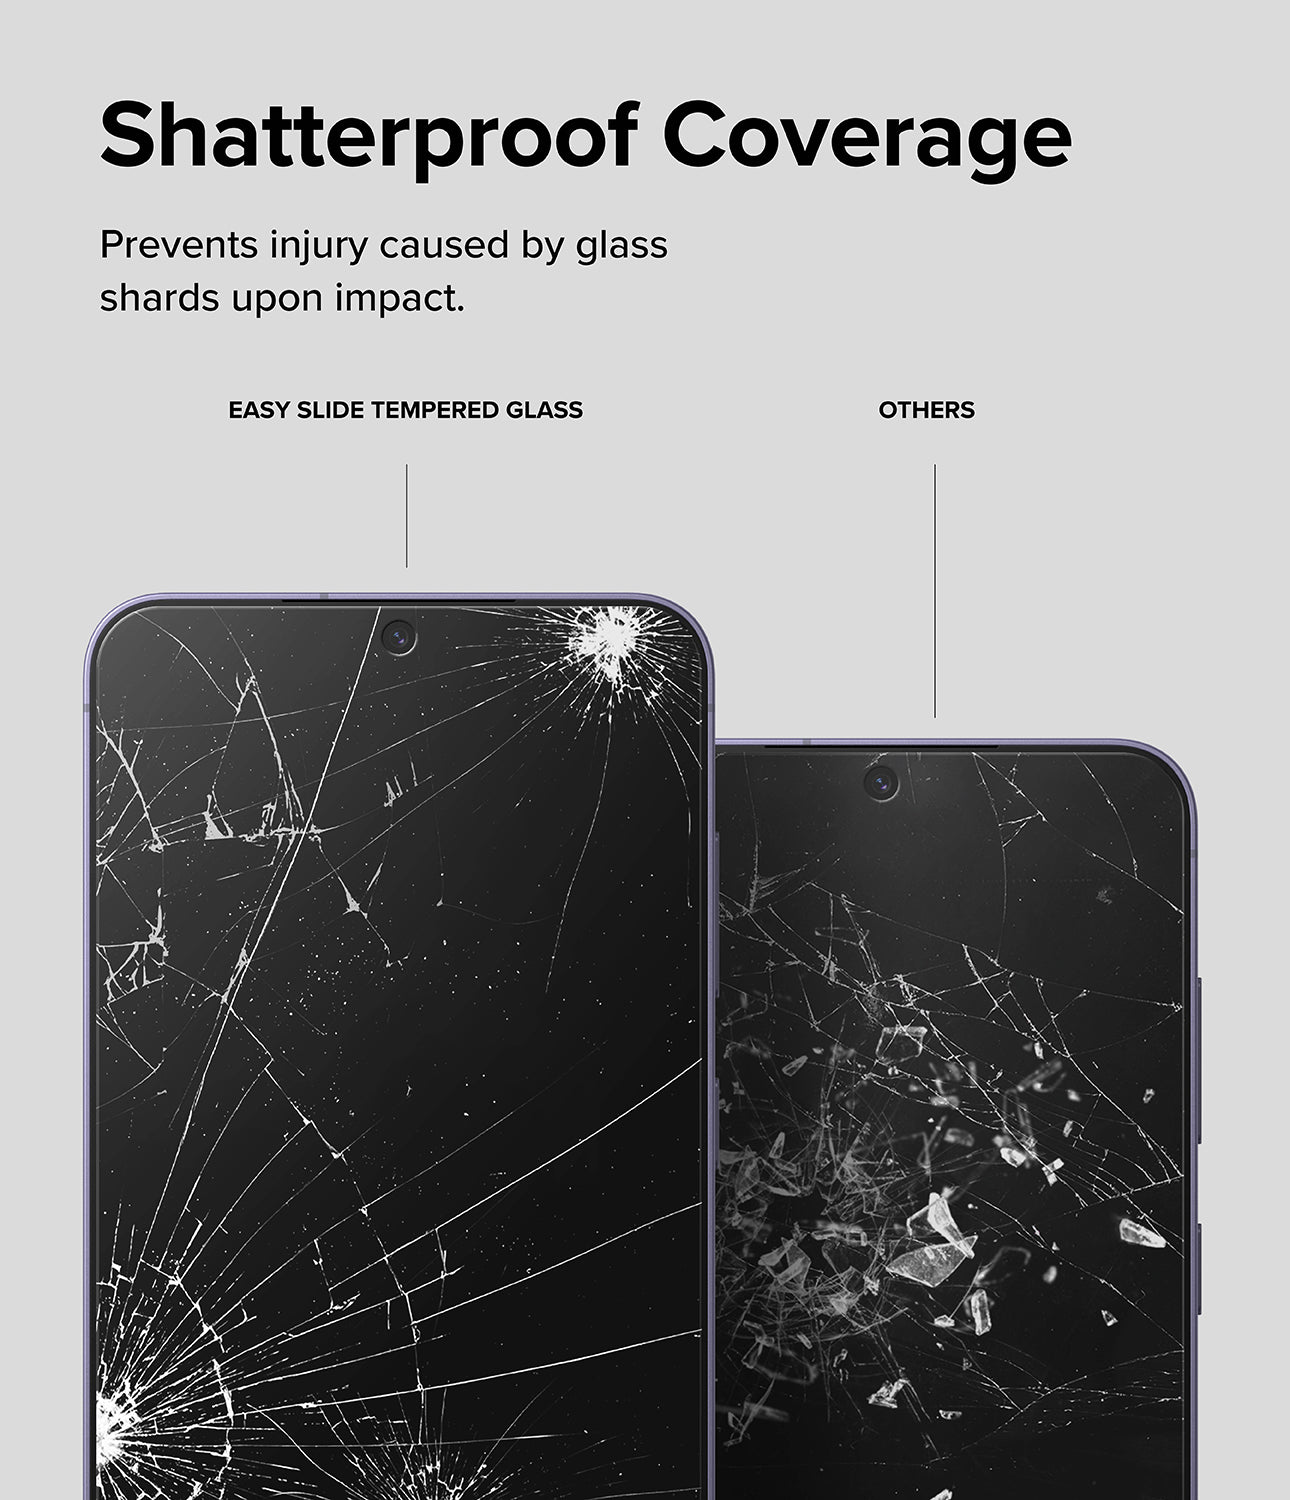 Galaxy S24 Plus Screen Protector | Easy Slide Tempered Glass - Shatterproof Coverage. Prevents injury caused by glass shards upon impact. 